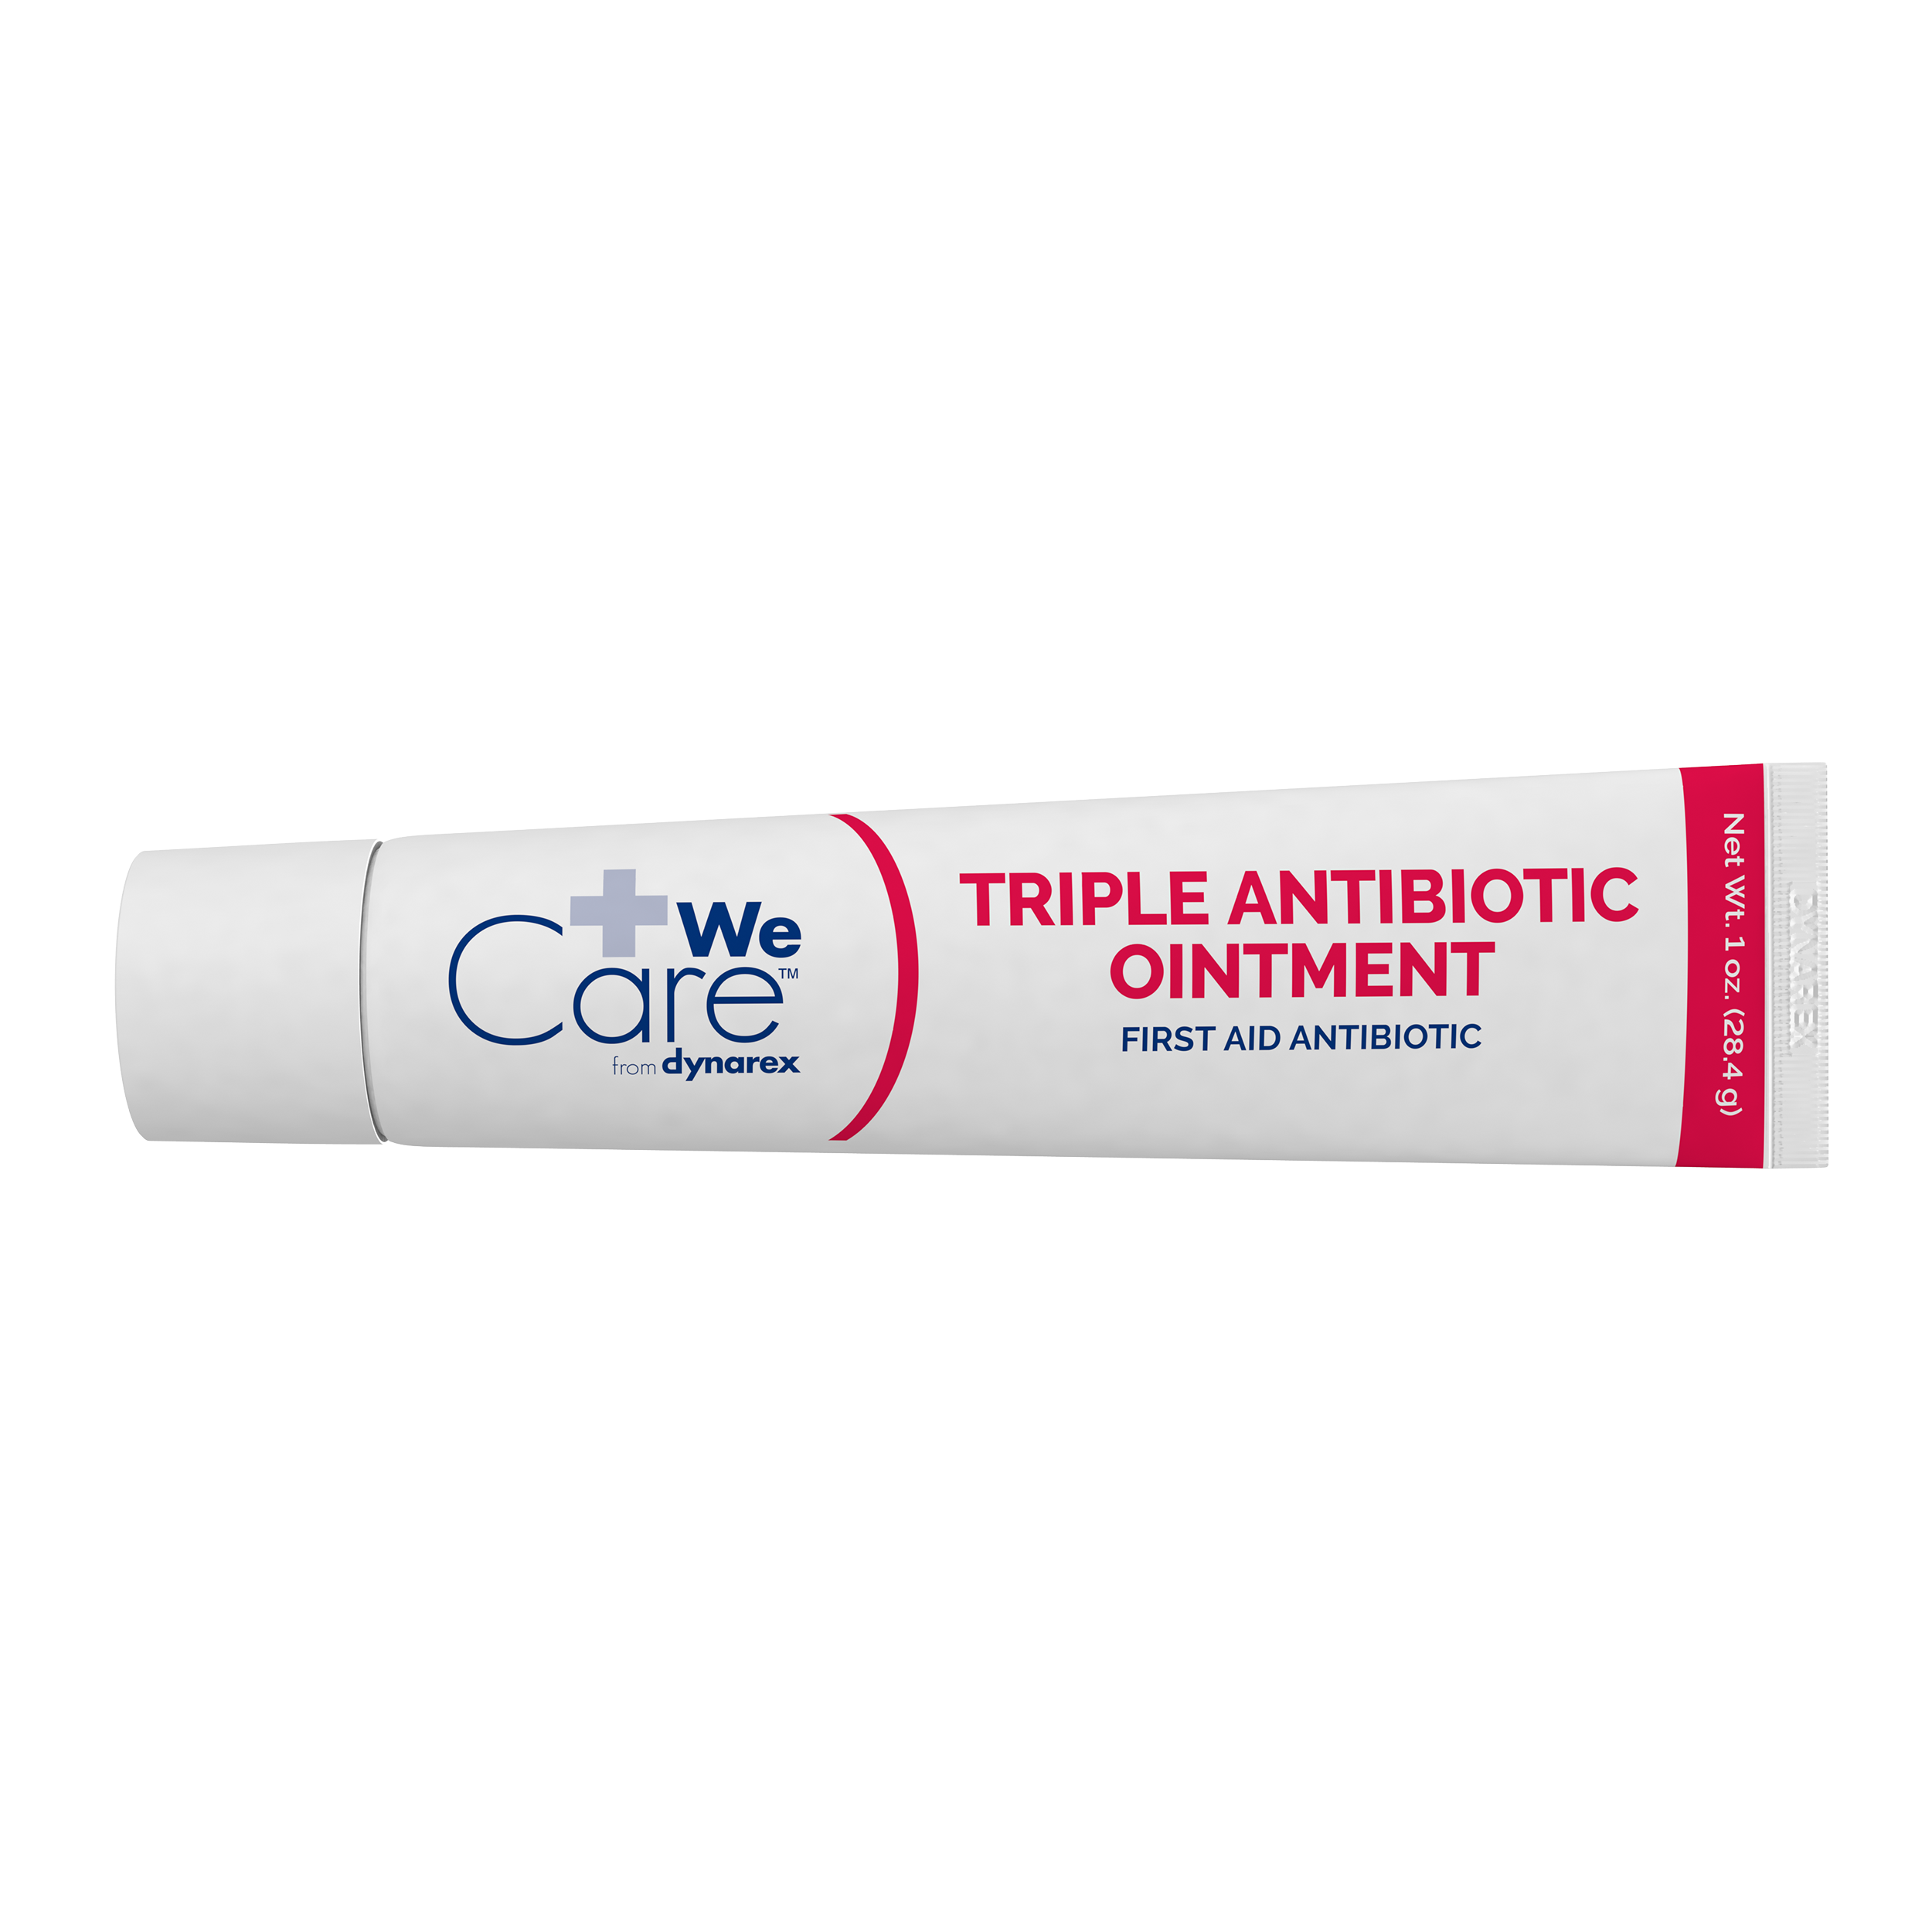 Dynarex #1184 Triple Antibiotic First Aid Ointment in .5 Gram Tubes